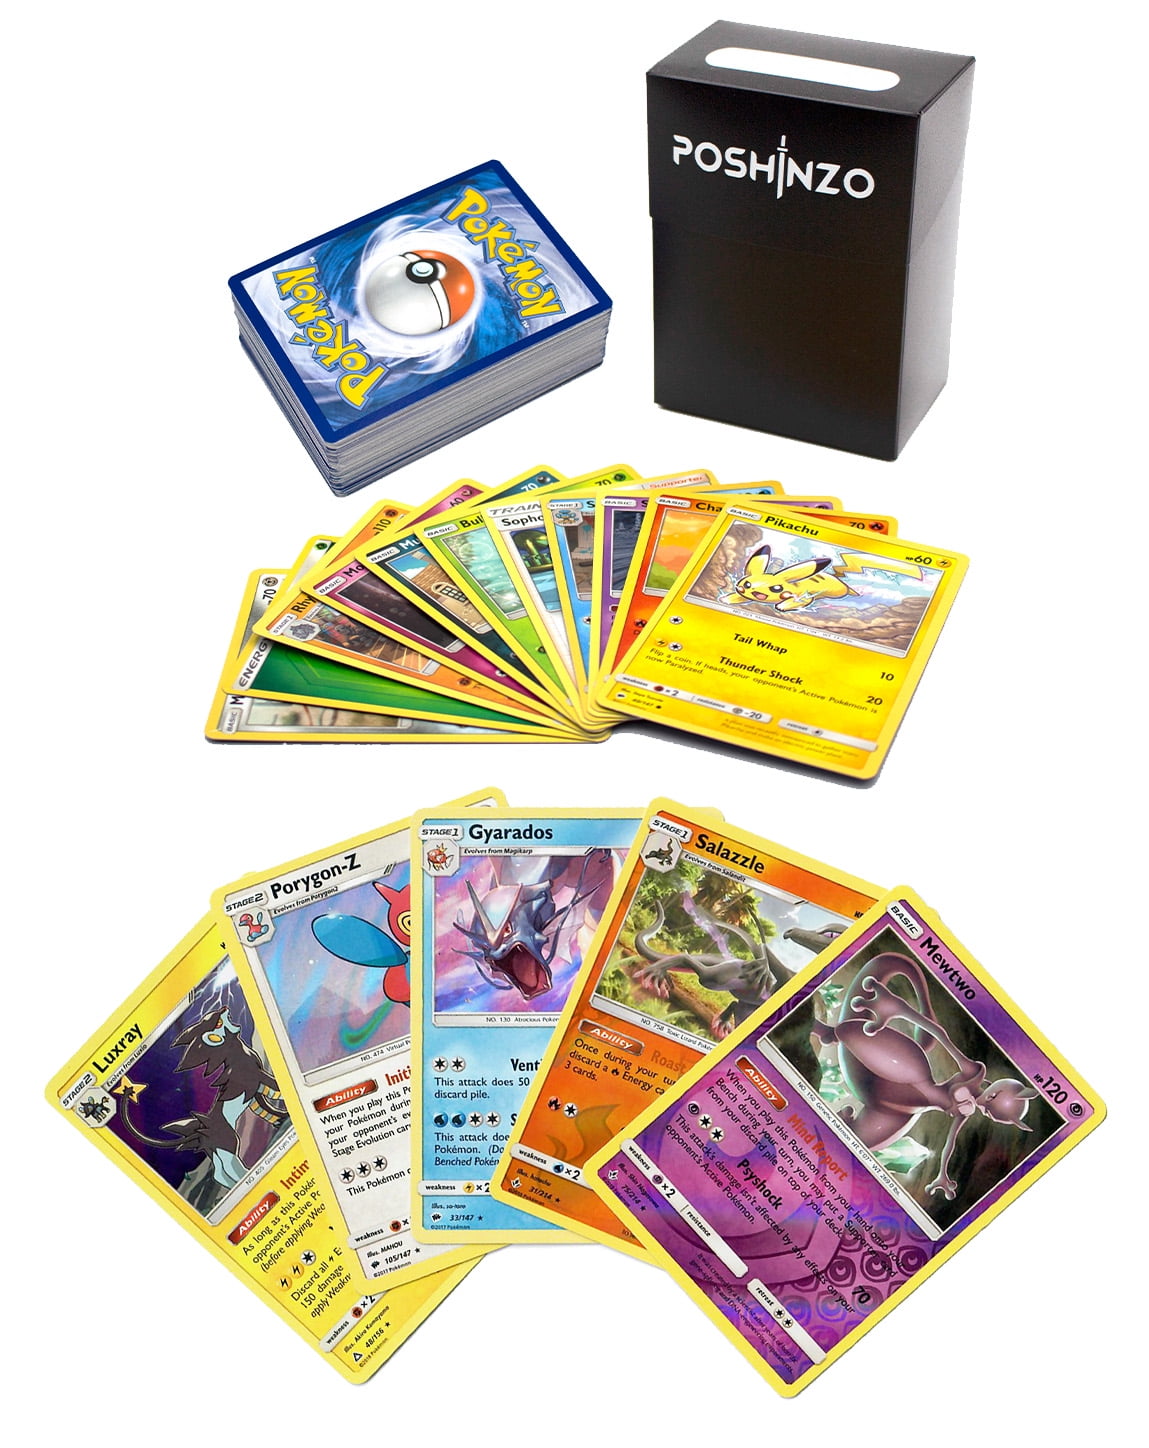 Details about   RARE Pokémon Cards OLD Vintage Current 20 CARD PACK with 4 HOLOS!!!!